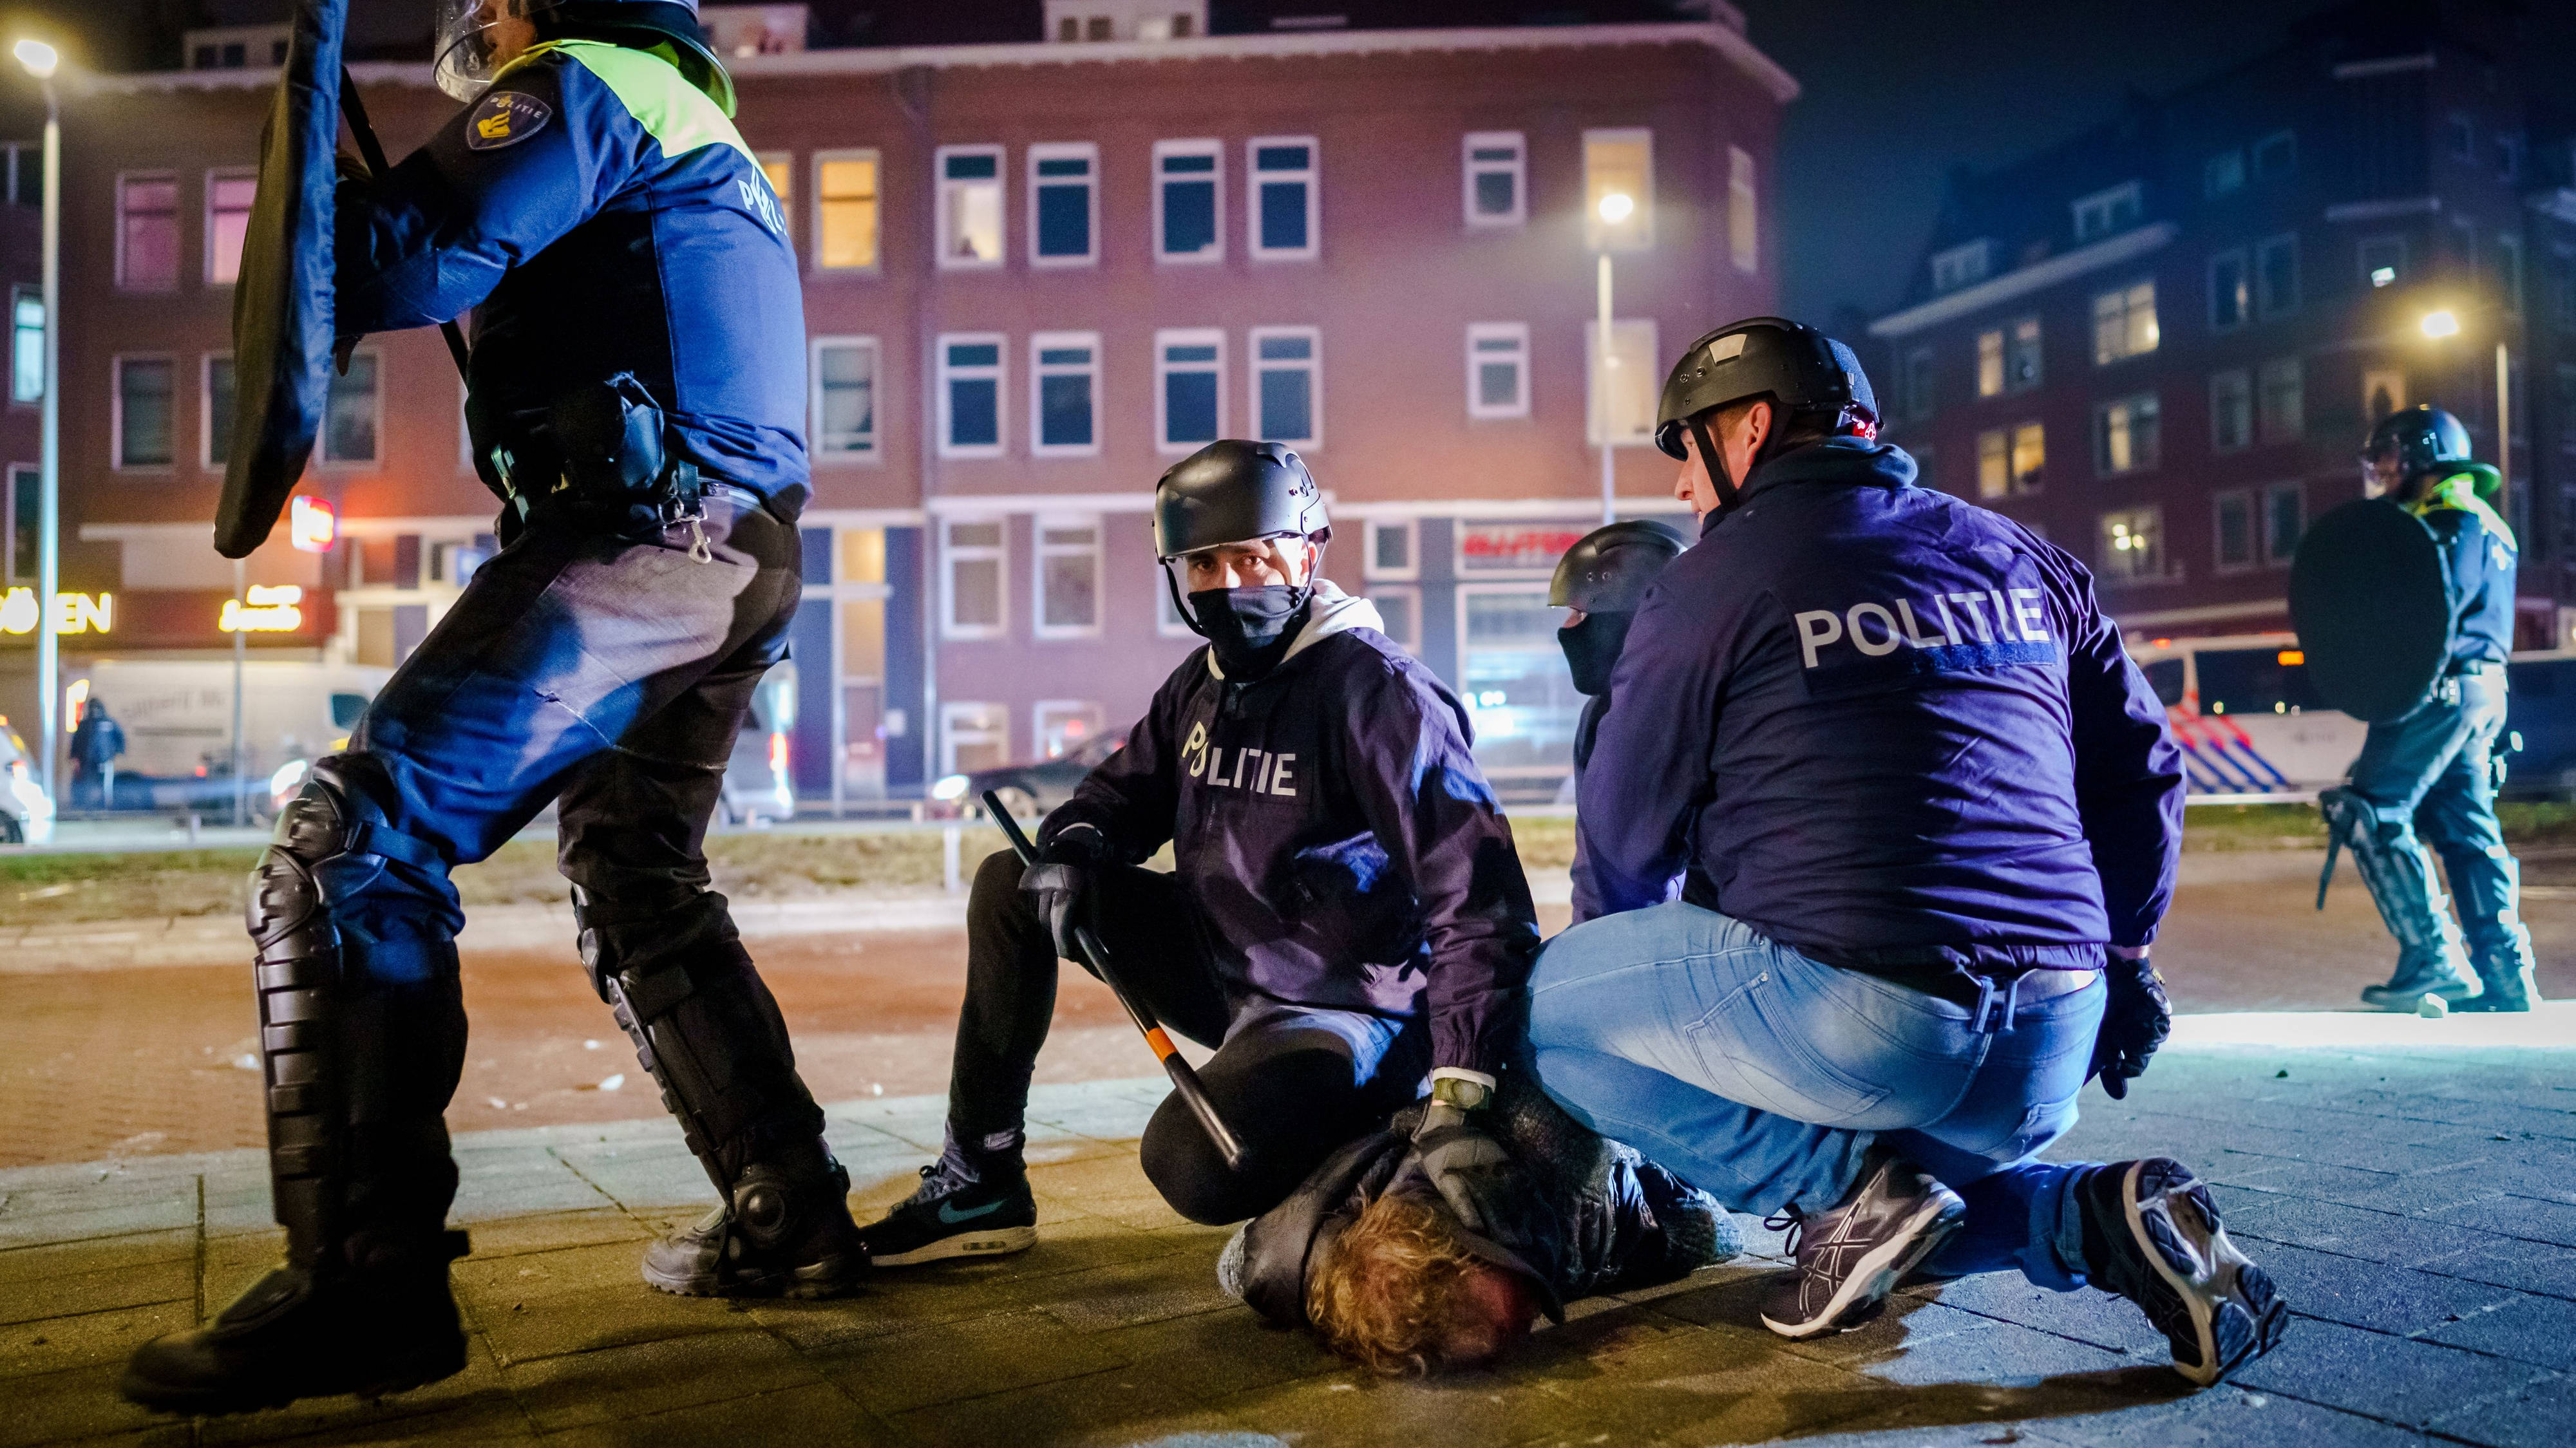 Third night of anti-lockdown riots sweep cities in the Netherlands - LBC